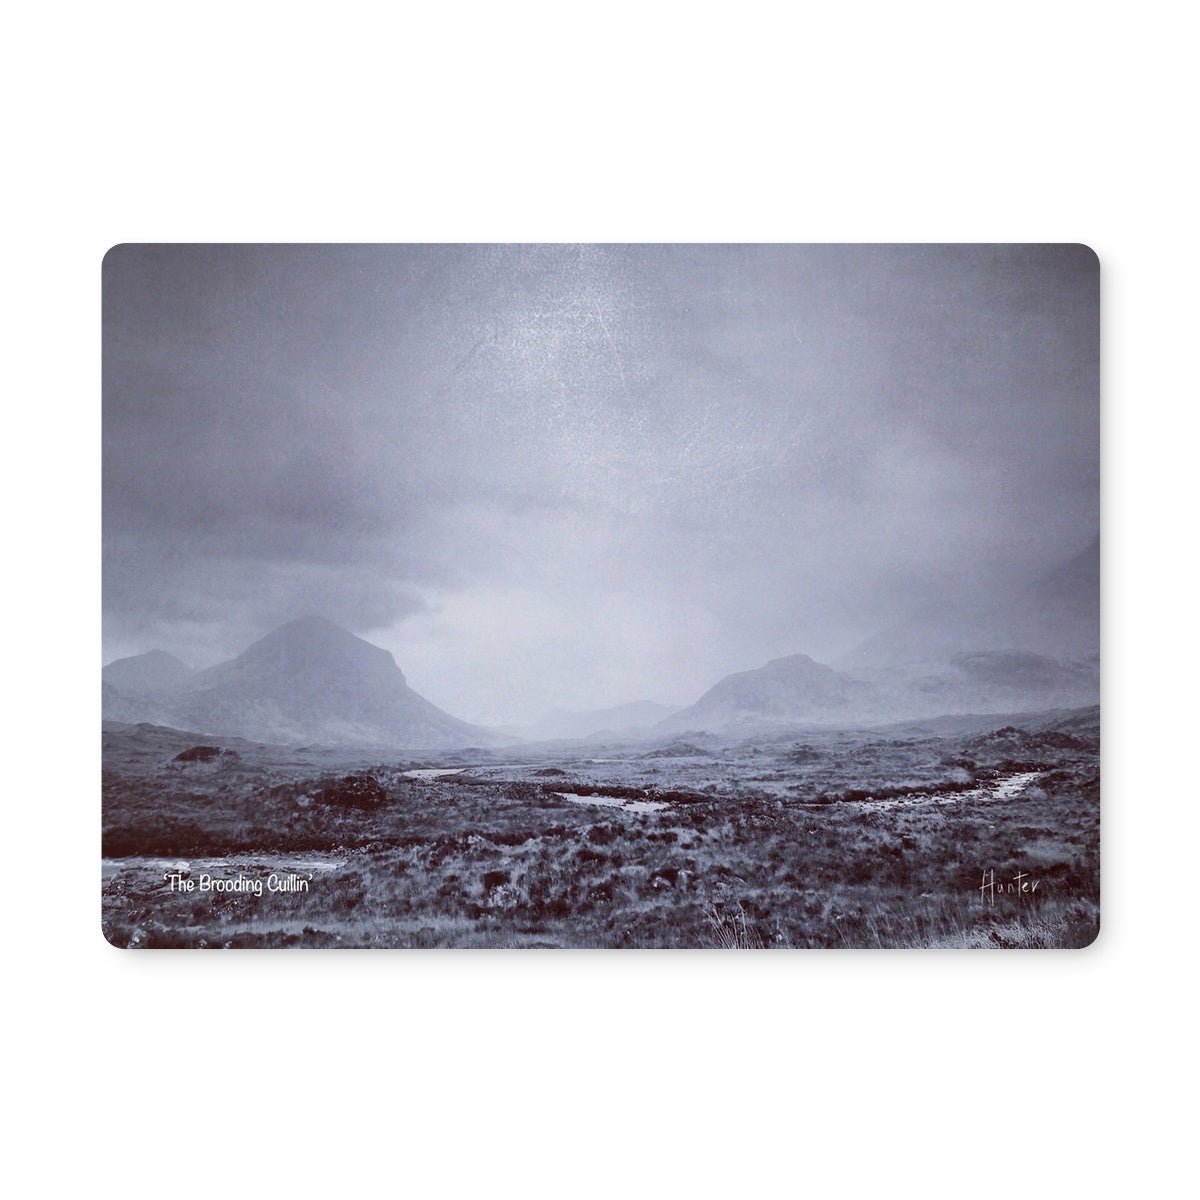 The Brooding Cuillin Skye Art Gifts Placemat-Placemats-Skye Art Gallery-2 Placemats-Paintings, Prints, Homeware, Art Gifts From Scotland By Scottish Artist Kevin Hunter